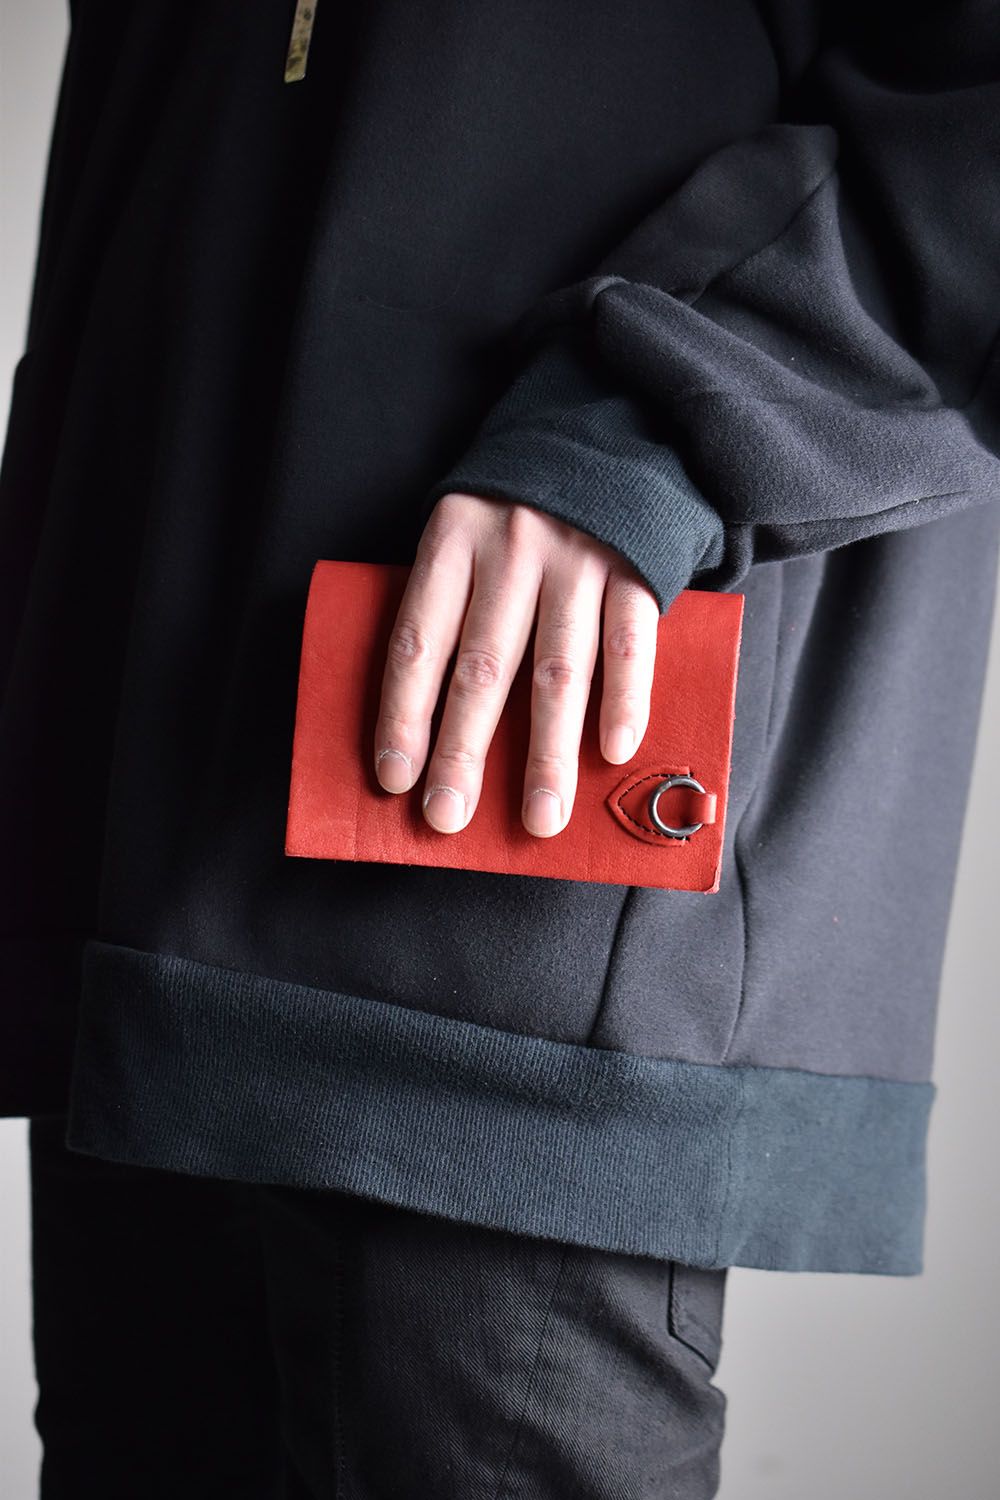 Double Shoulder Wallet"Red"/ダブルショルダーウォレット"レッド"